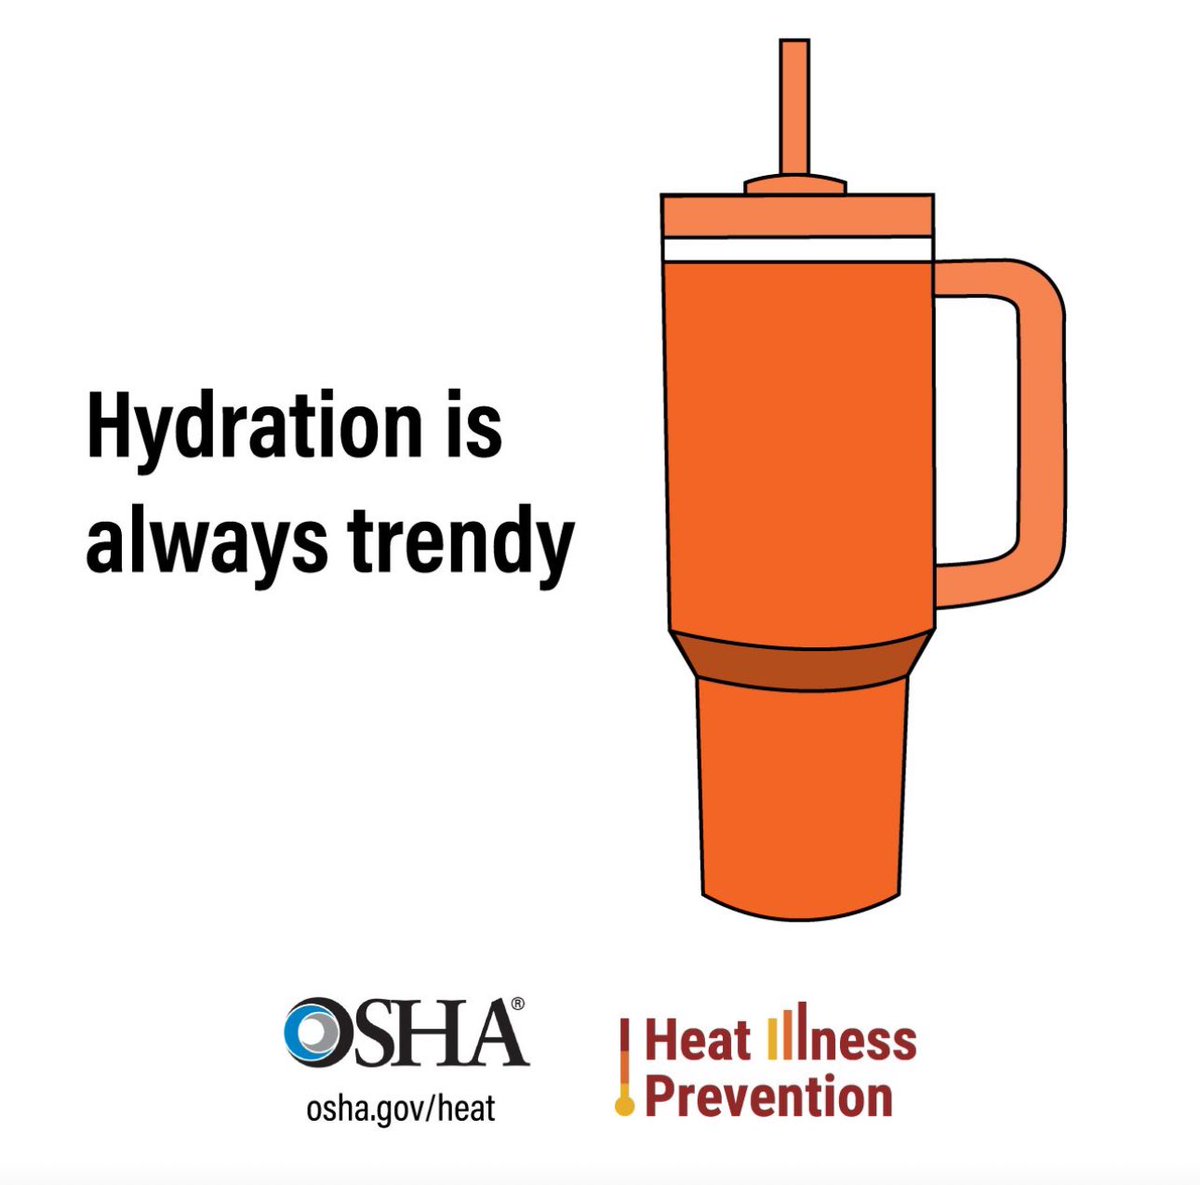 🥤Prevent heat illness among indoor and outdoor workers. Stay hydrated before, during and after work by drinking at least 8 ounces of water every 15-20 minutes! Learn more: 👉 osha.gov/heat  #HeatIllnessPrevention #HeatSafety